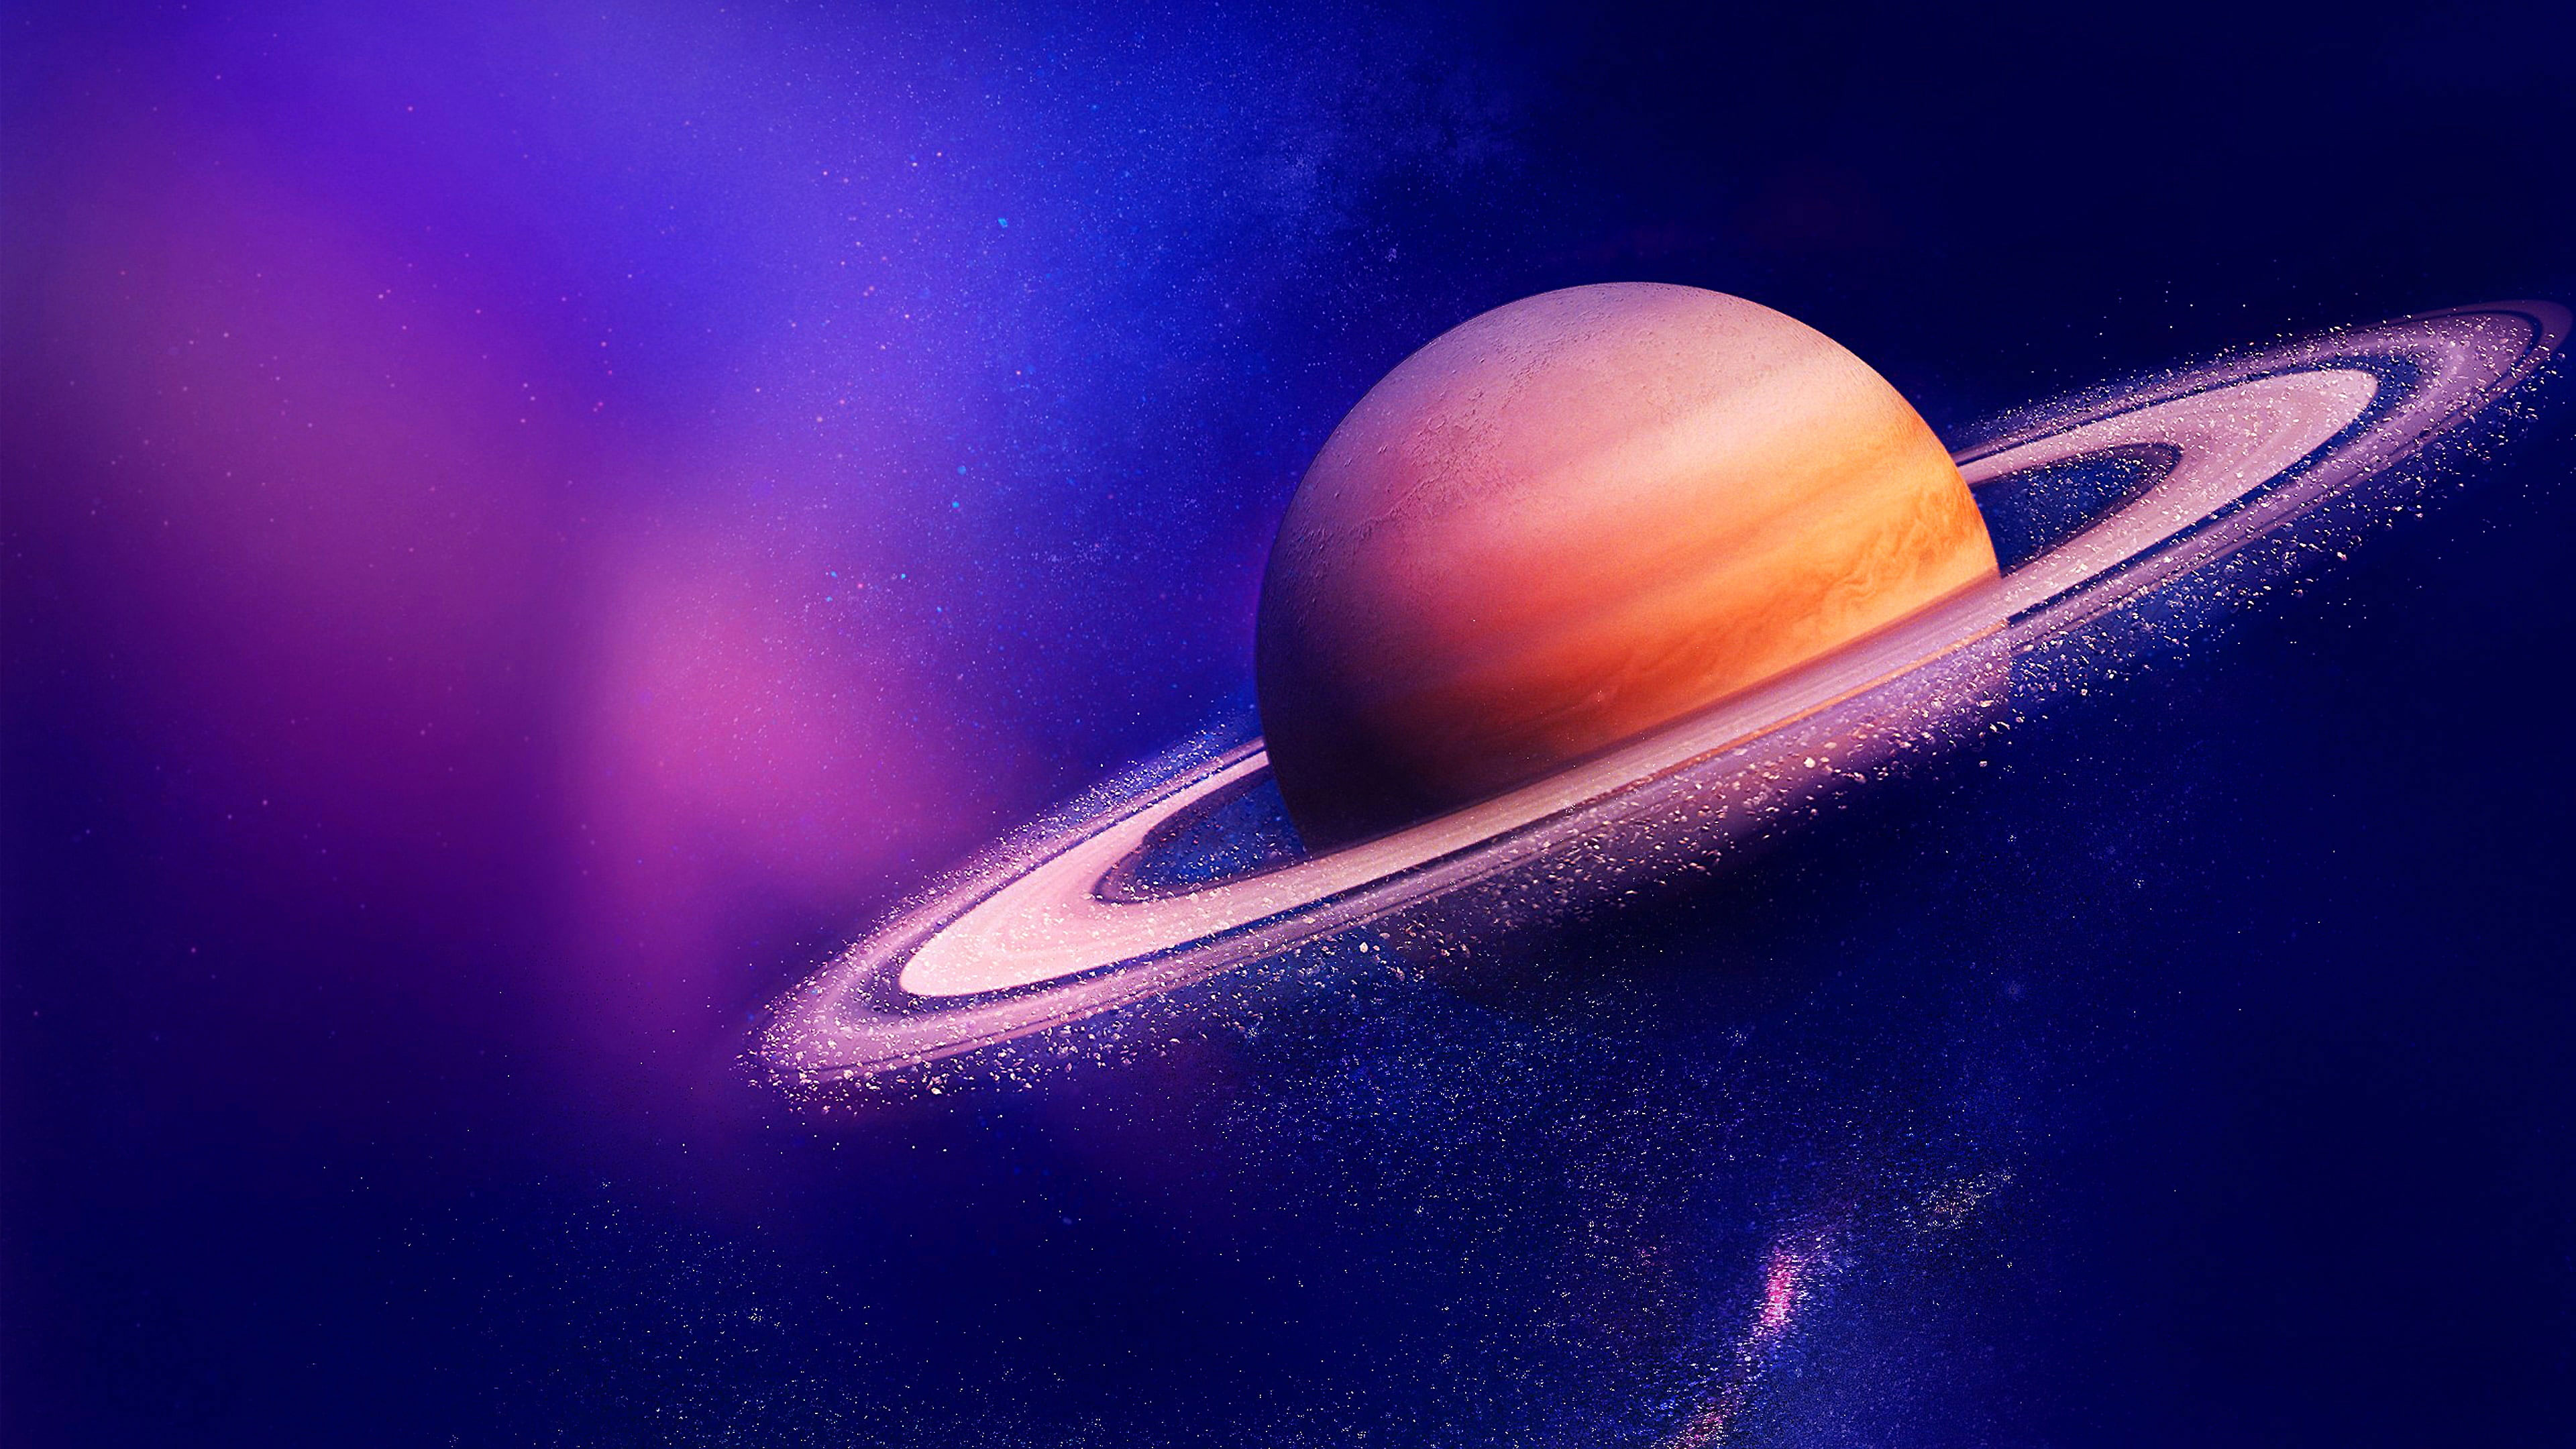 Wallpaper Saturn, Planet, Ringed Planet, Planetary Ring, Planet, Space